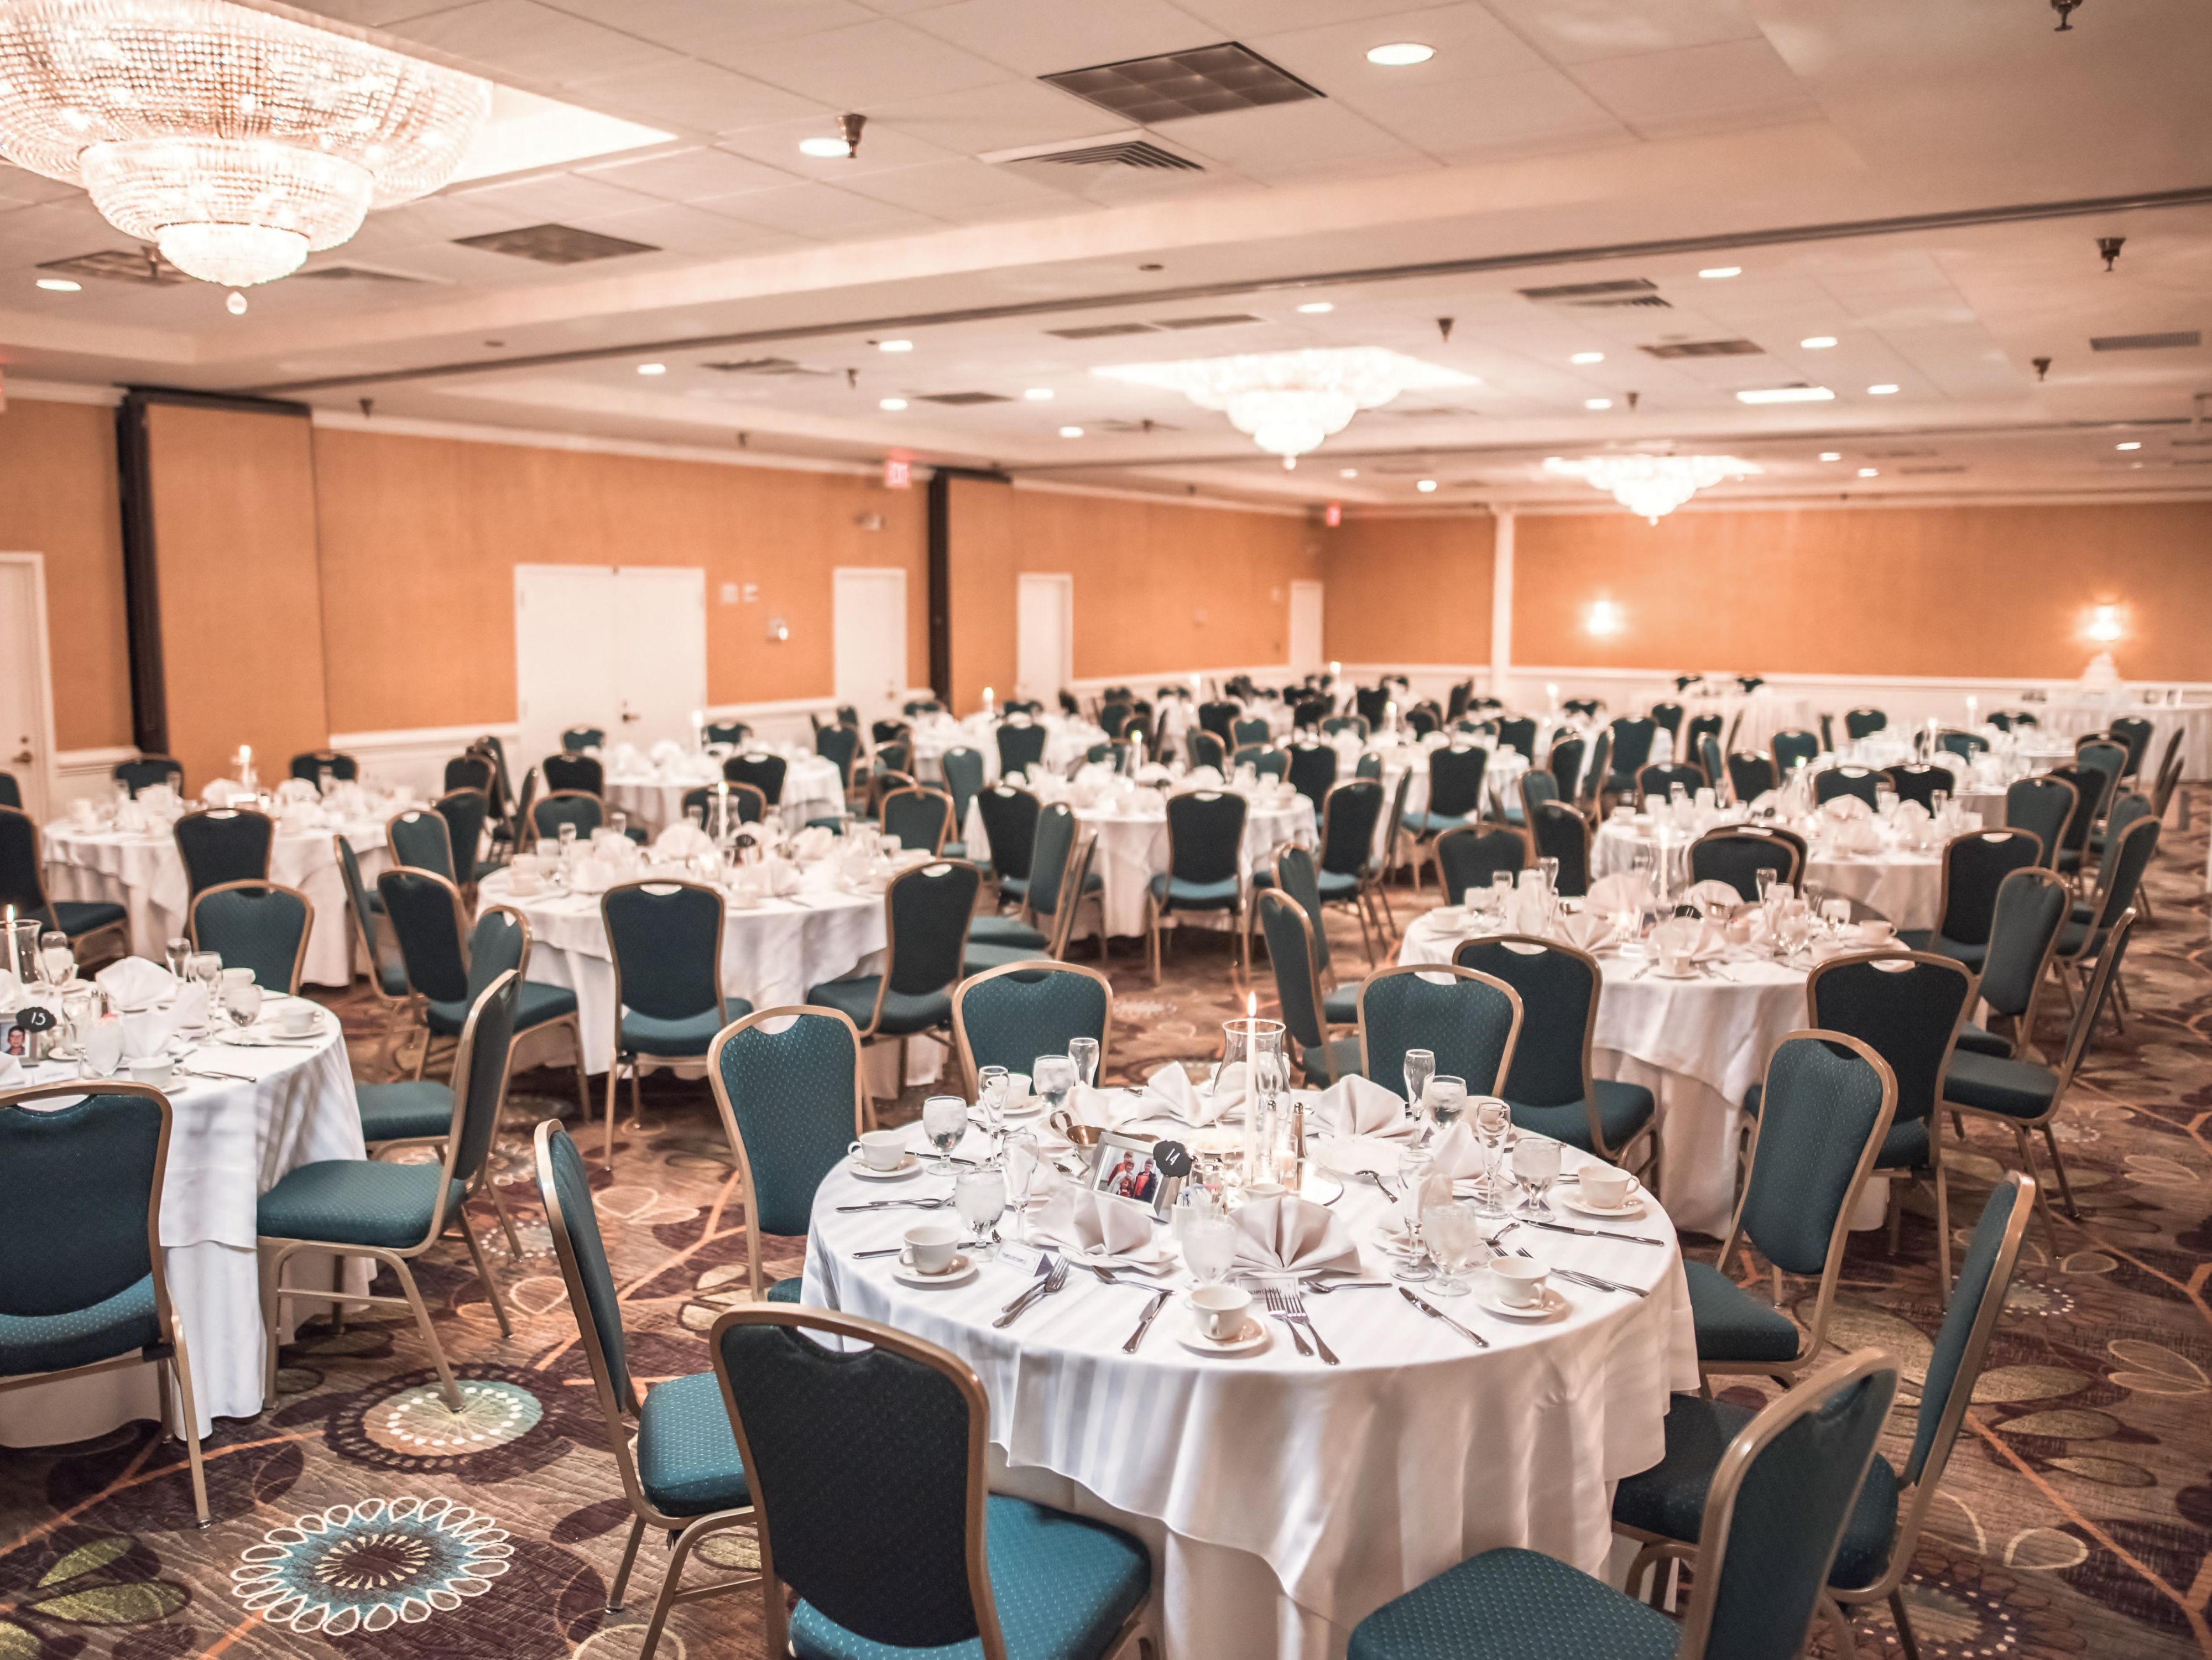 Meet, connect, and celebrate in nearly 5,000 square feet of event space, including two ballrooms. Our stylish Arlington meeting space is perfect for business and social gatherings, from small conferences to weddings and reunions. Bring it all together with audiovisual equipment and catering services.